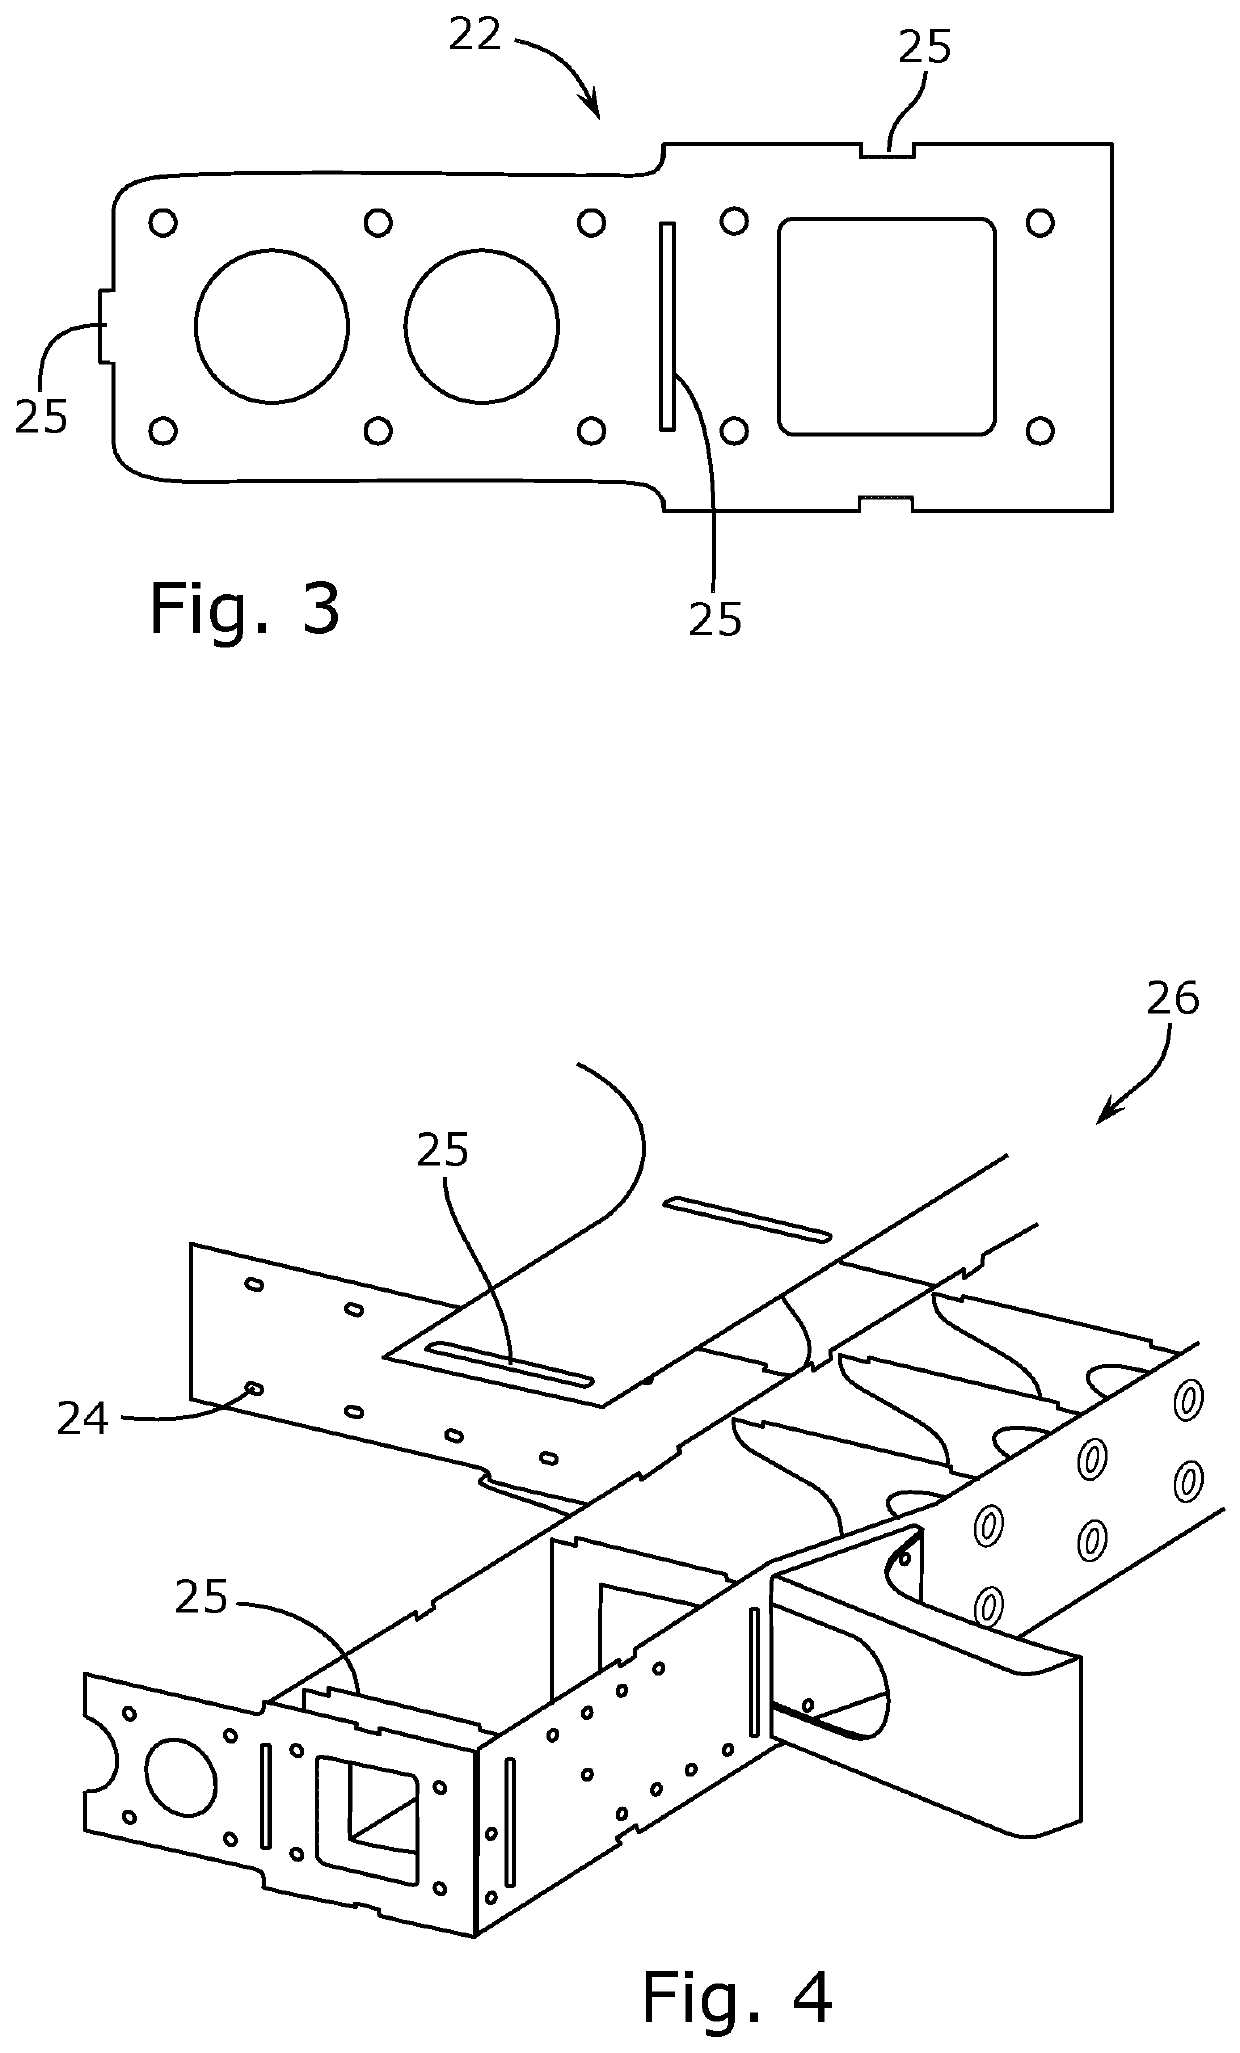 Method for manufacturing a railcar body